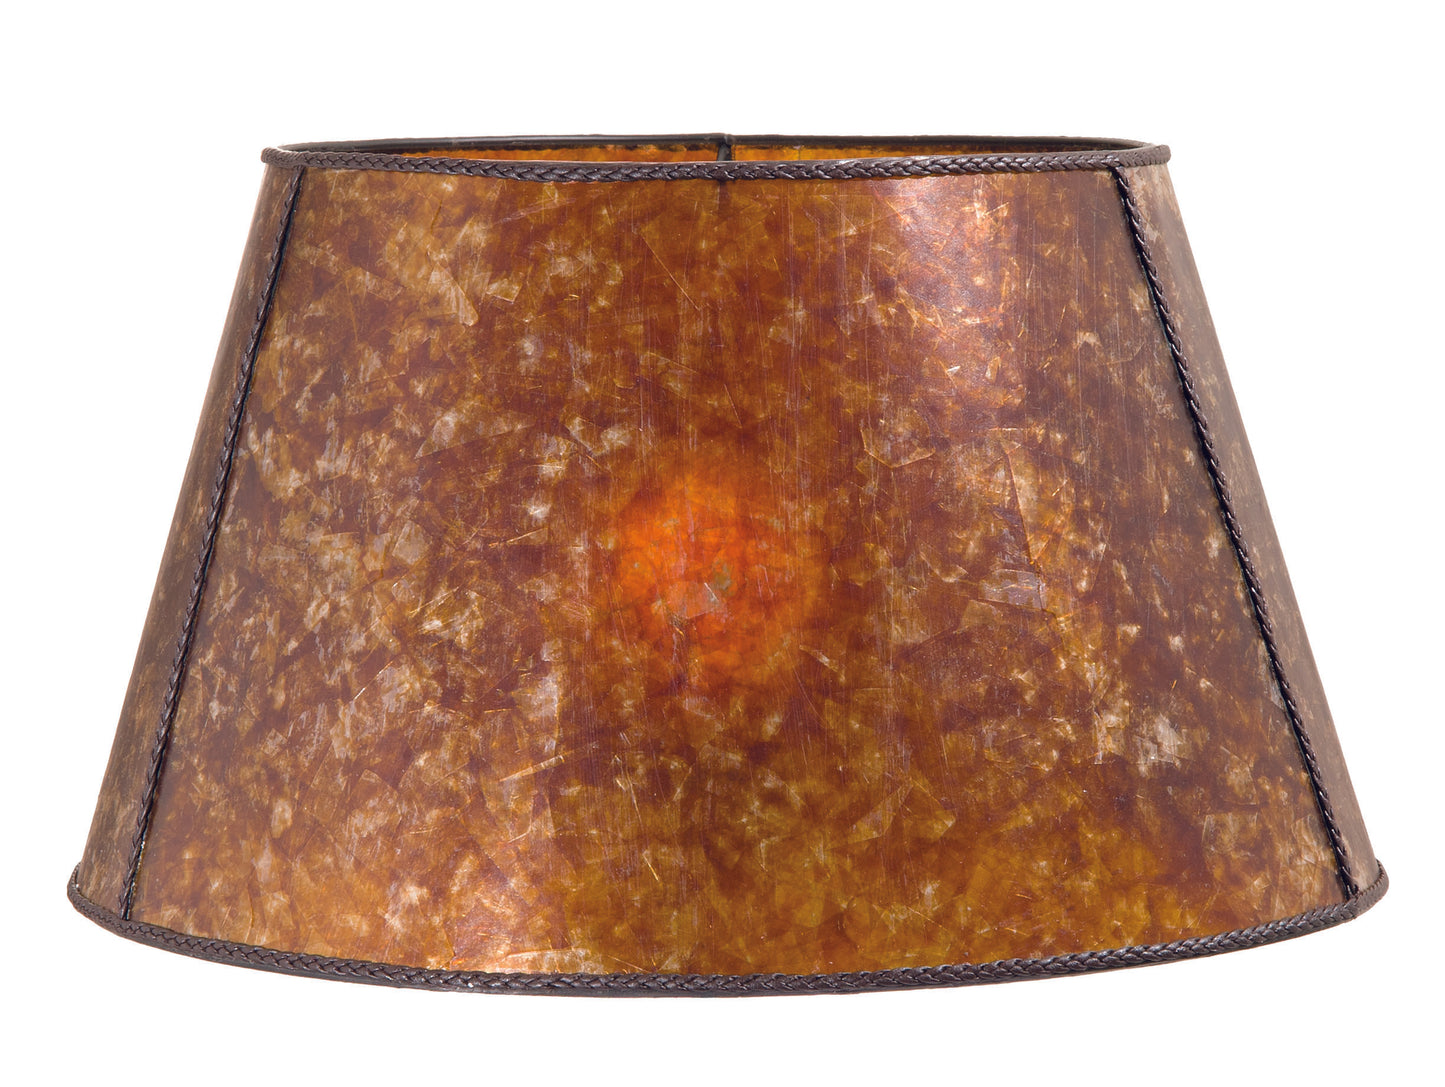 Amber Mica Empire Style Floor Lamp Shade